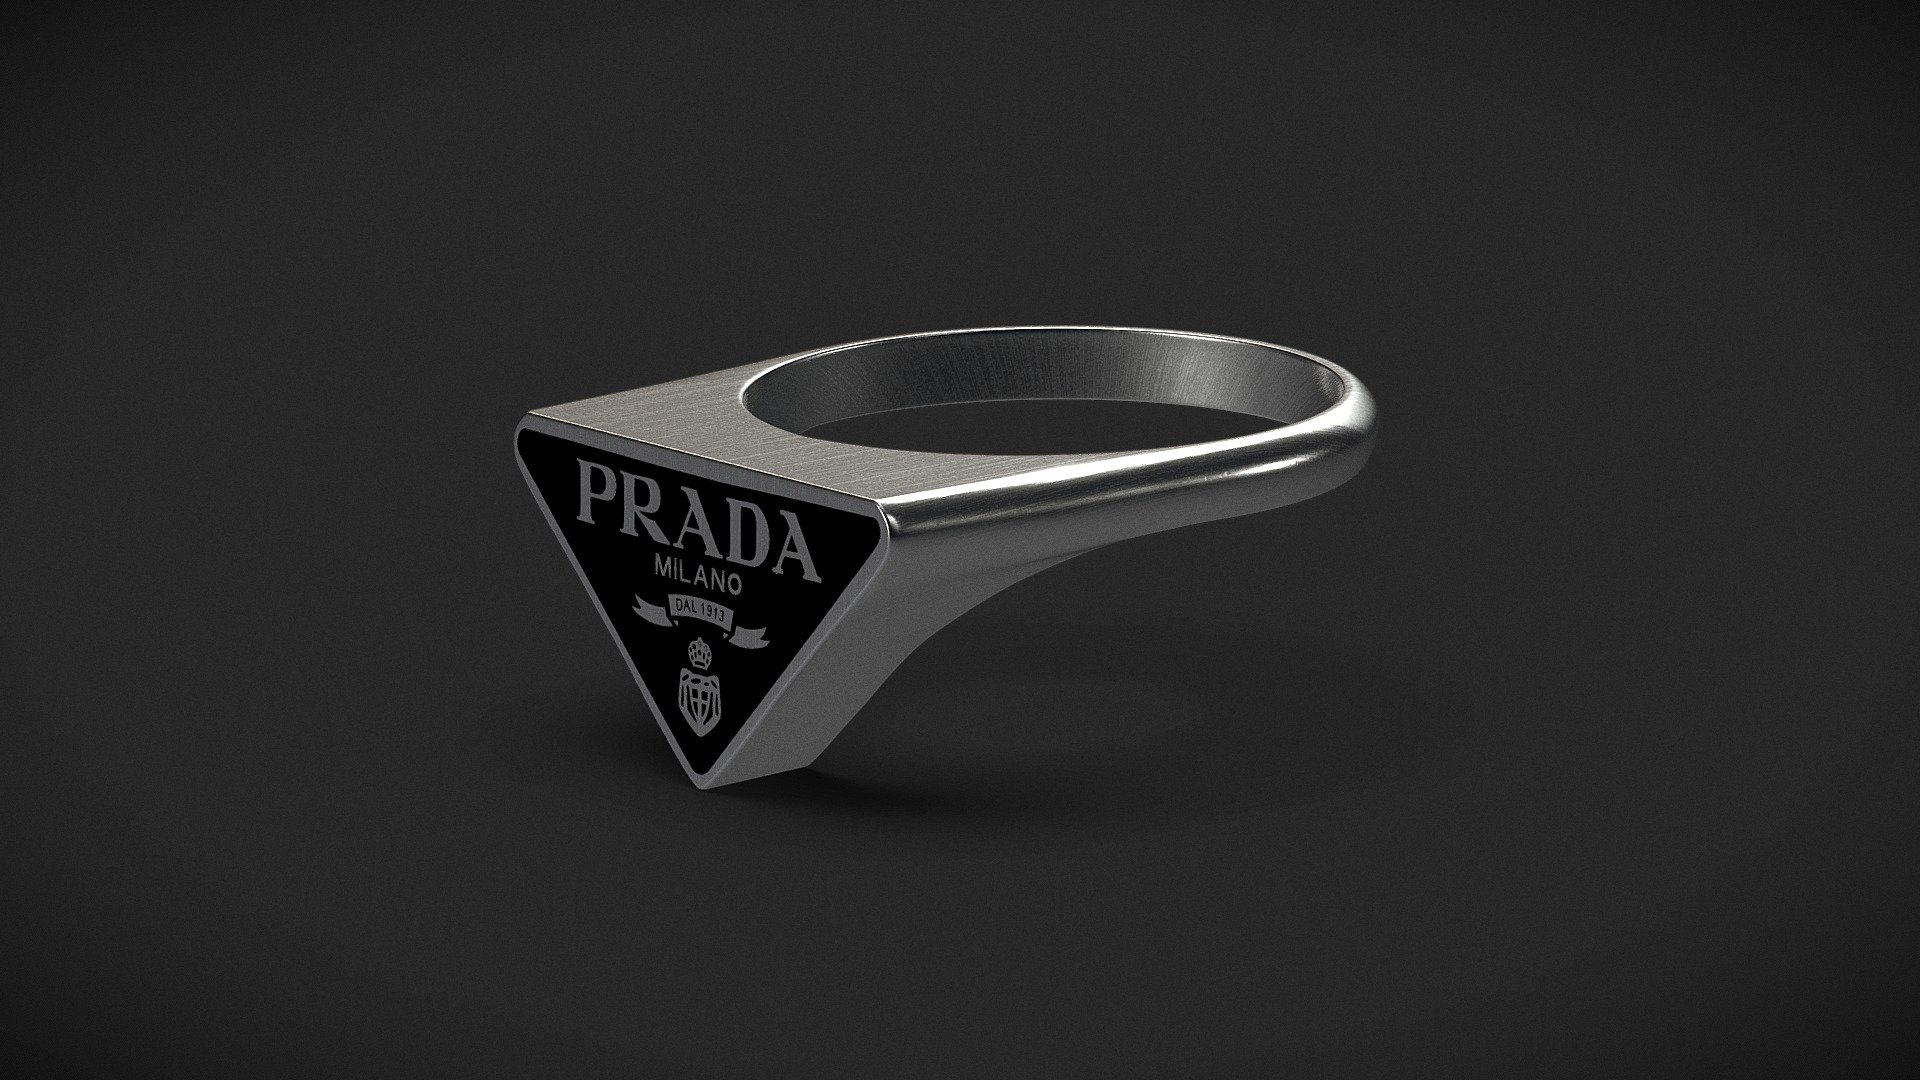 Realistic 3d model of Prada Symbole Ring Black edition desing jewelry.
Project done using Maya and Photoshop 3d model